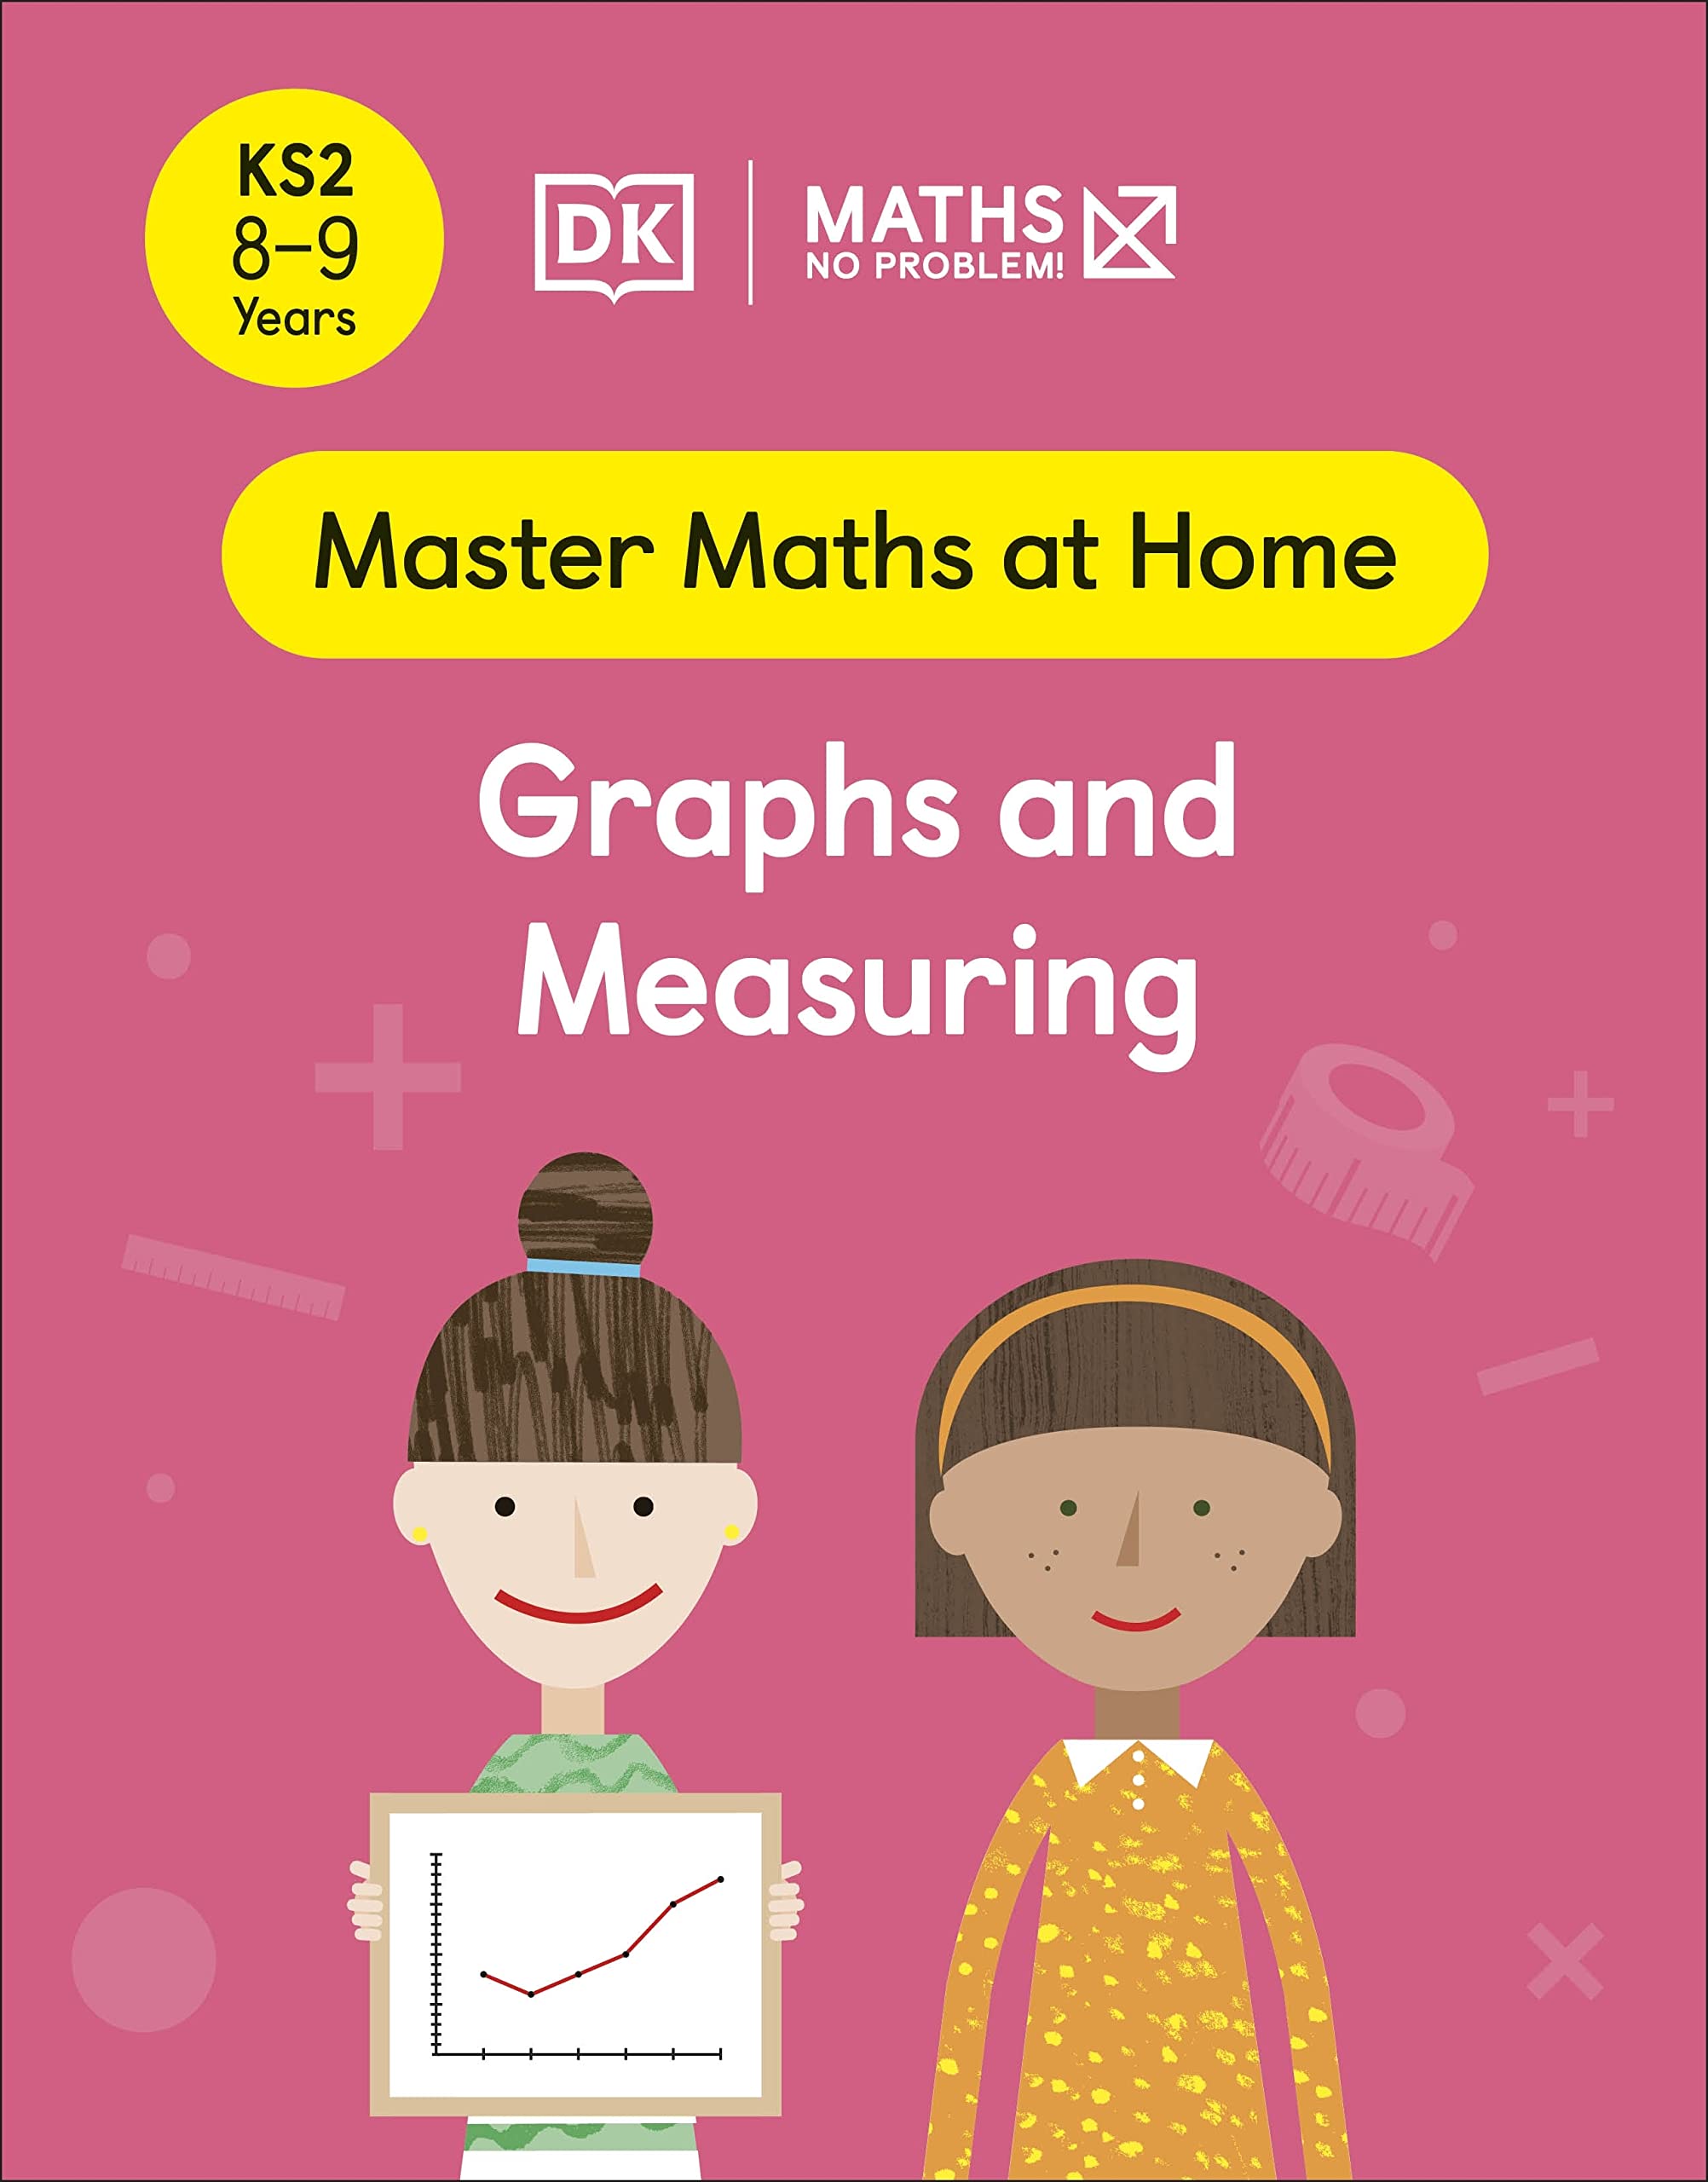 Maths - No Problem! Graphs and Measuring